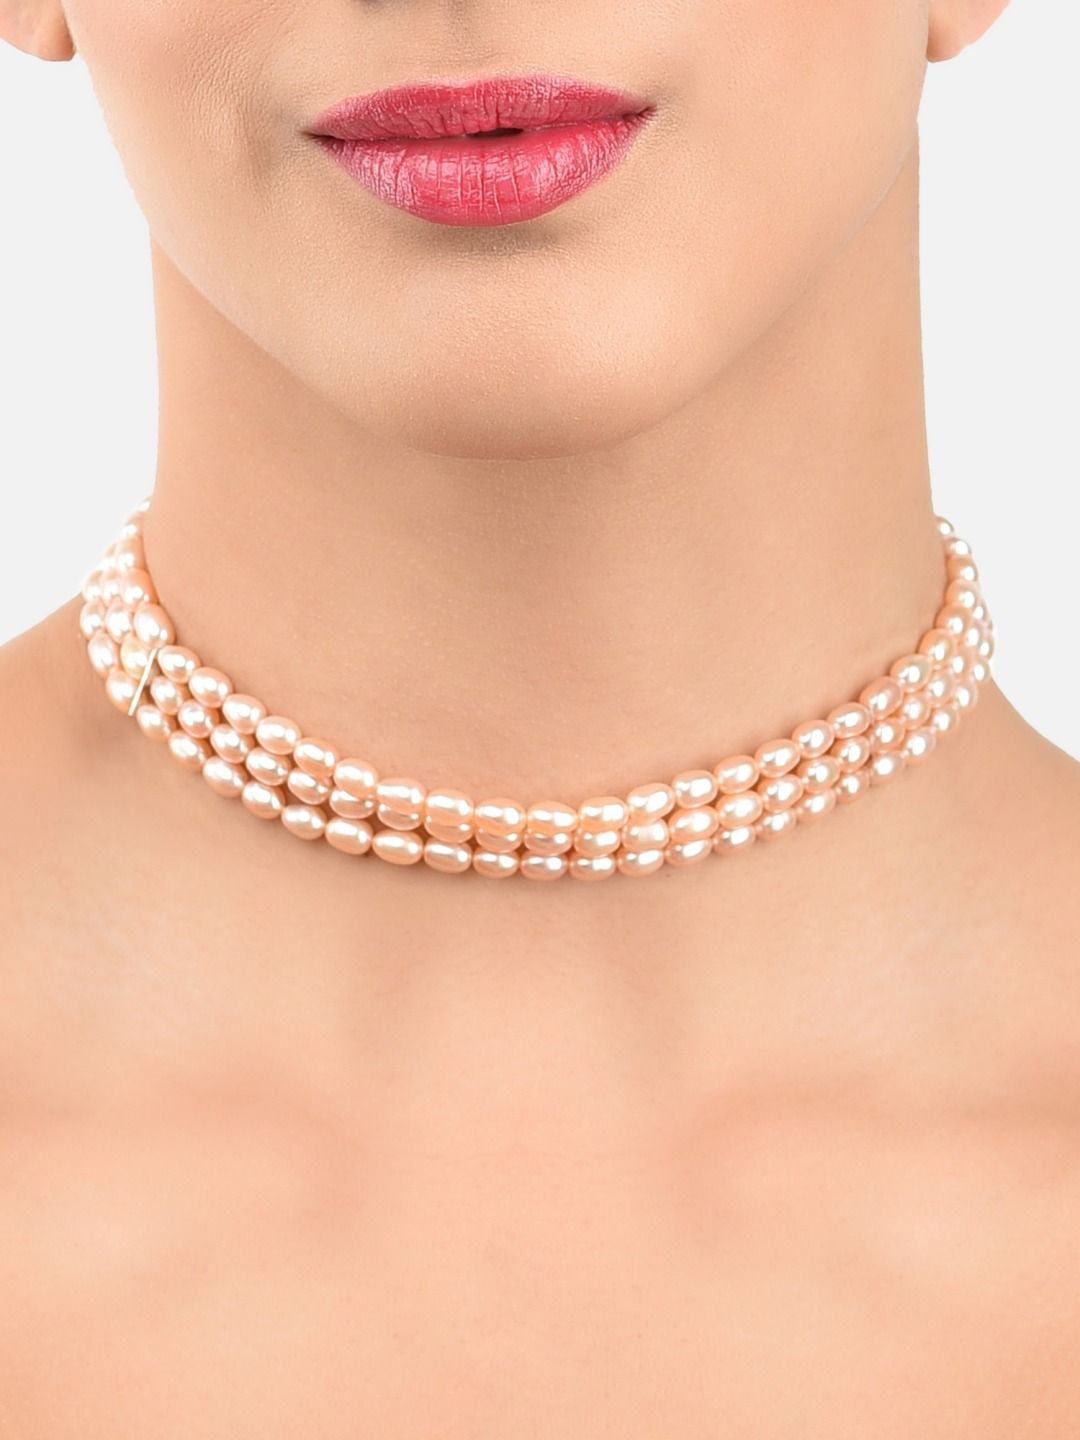 Zaveri Pearls Peach-Coloured Silver-Plated Rice Pearl Choker Necklace Price in India